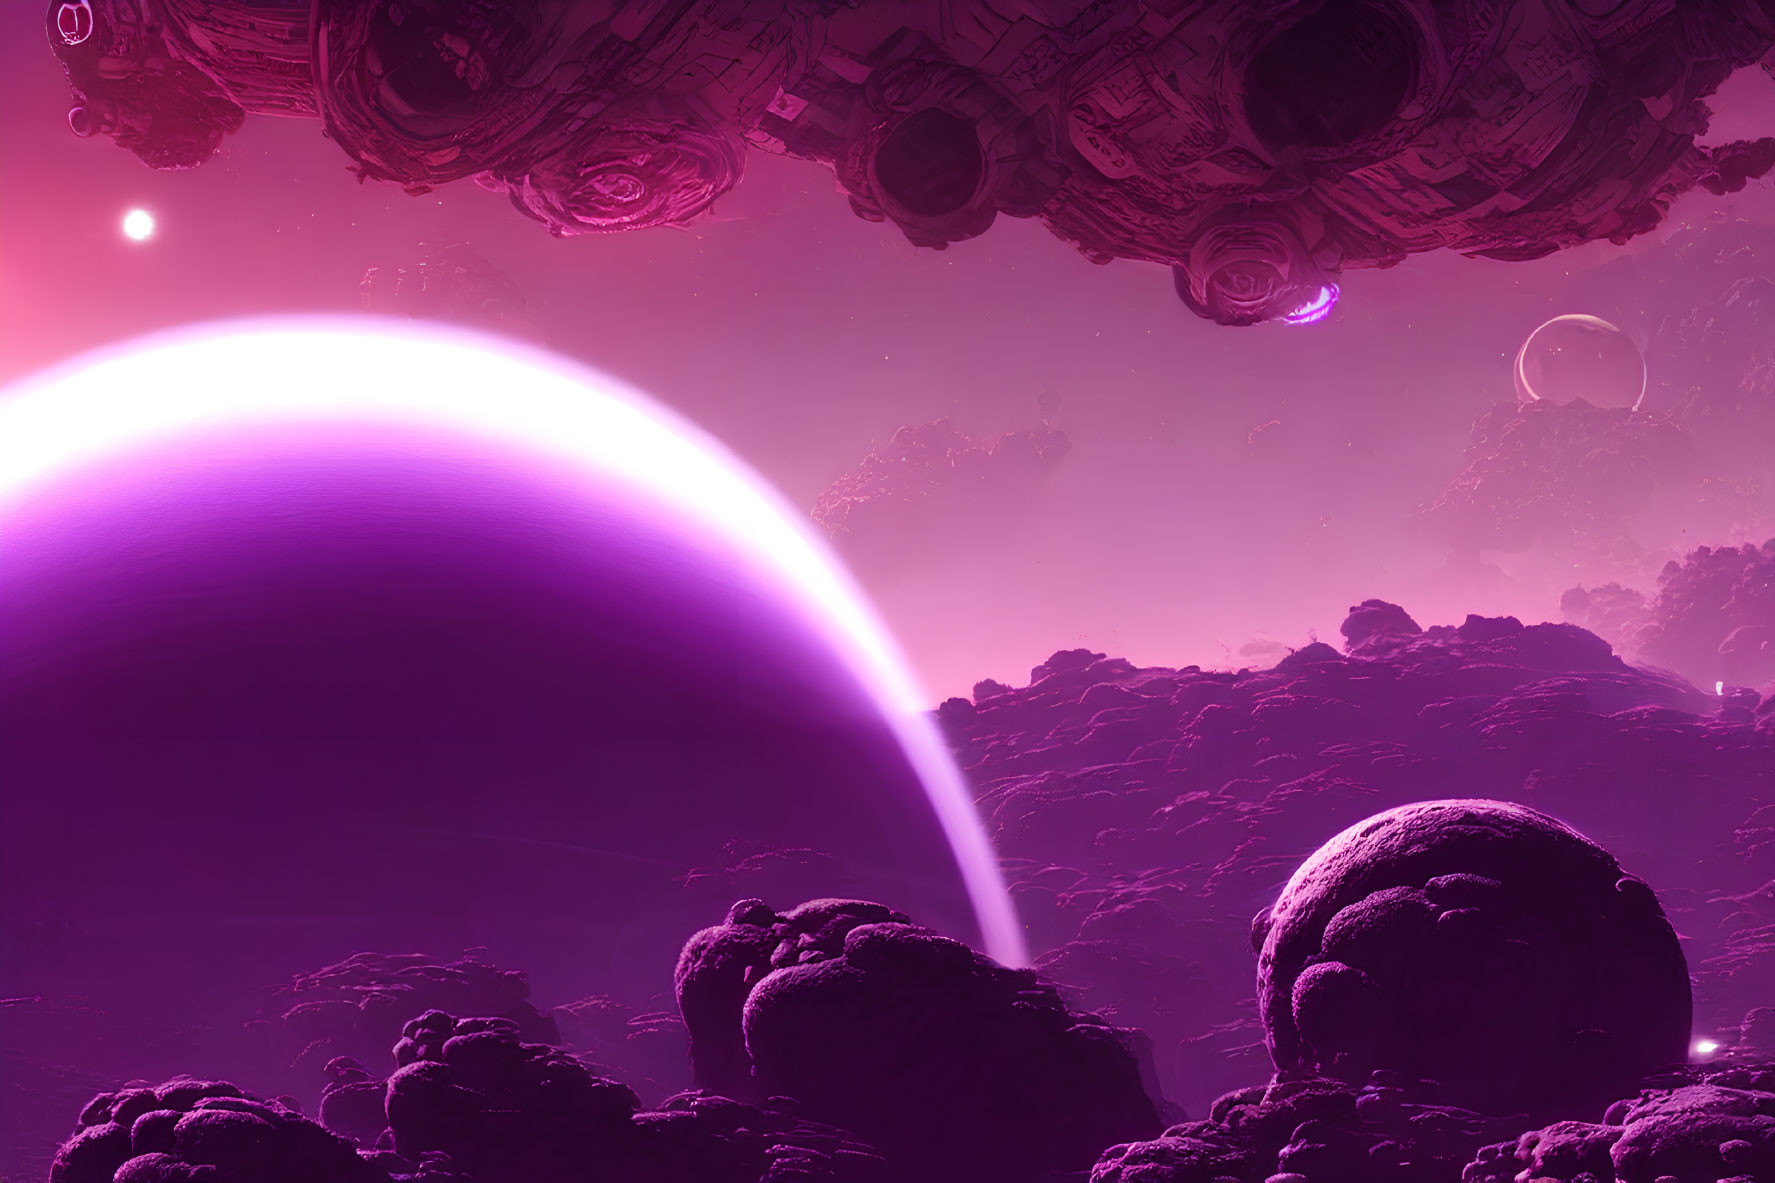 Purple-Hued Sci-Fi Landscape with Alien Structures and Multiple Celestial Bodies